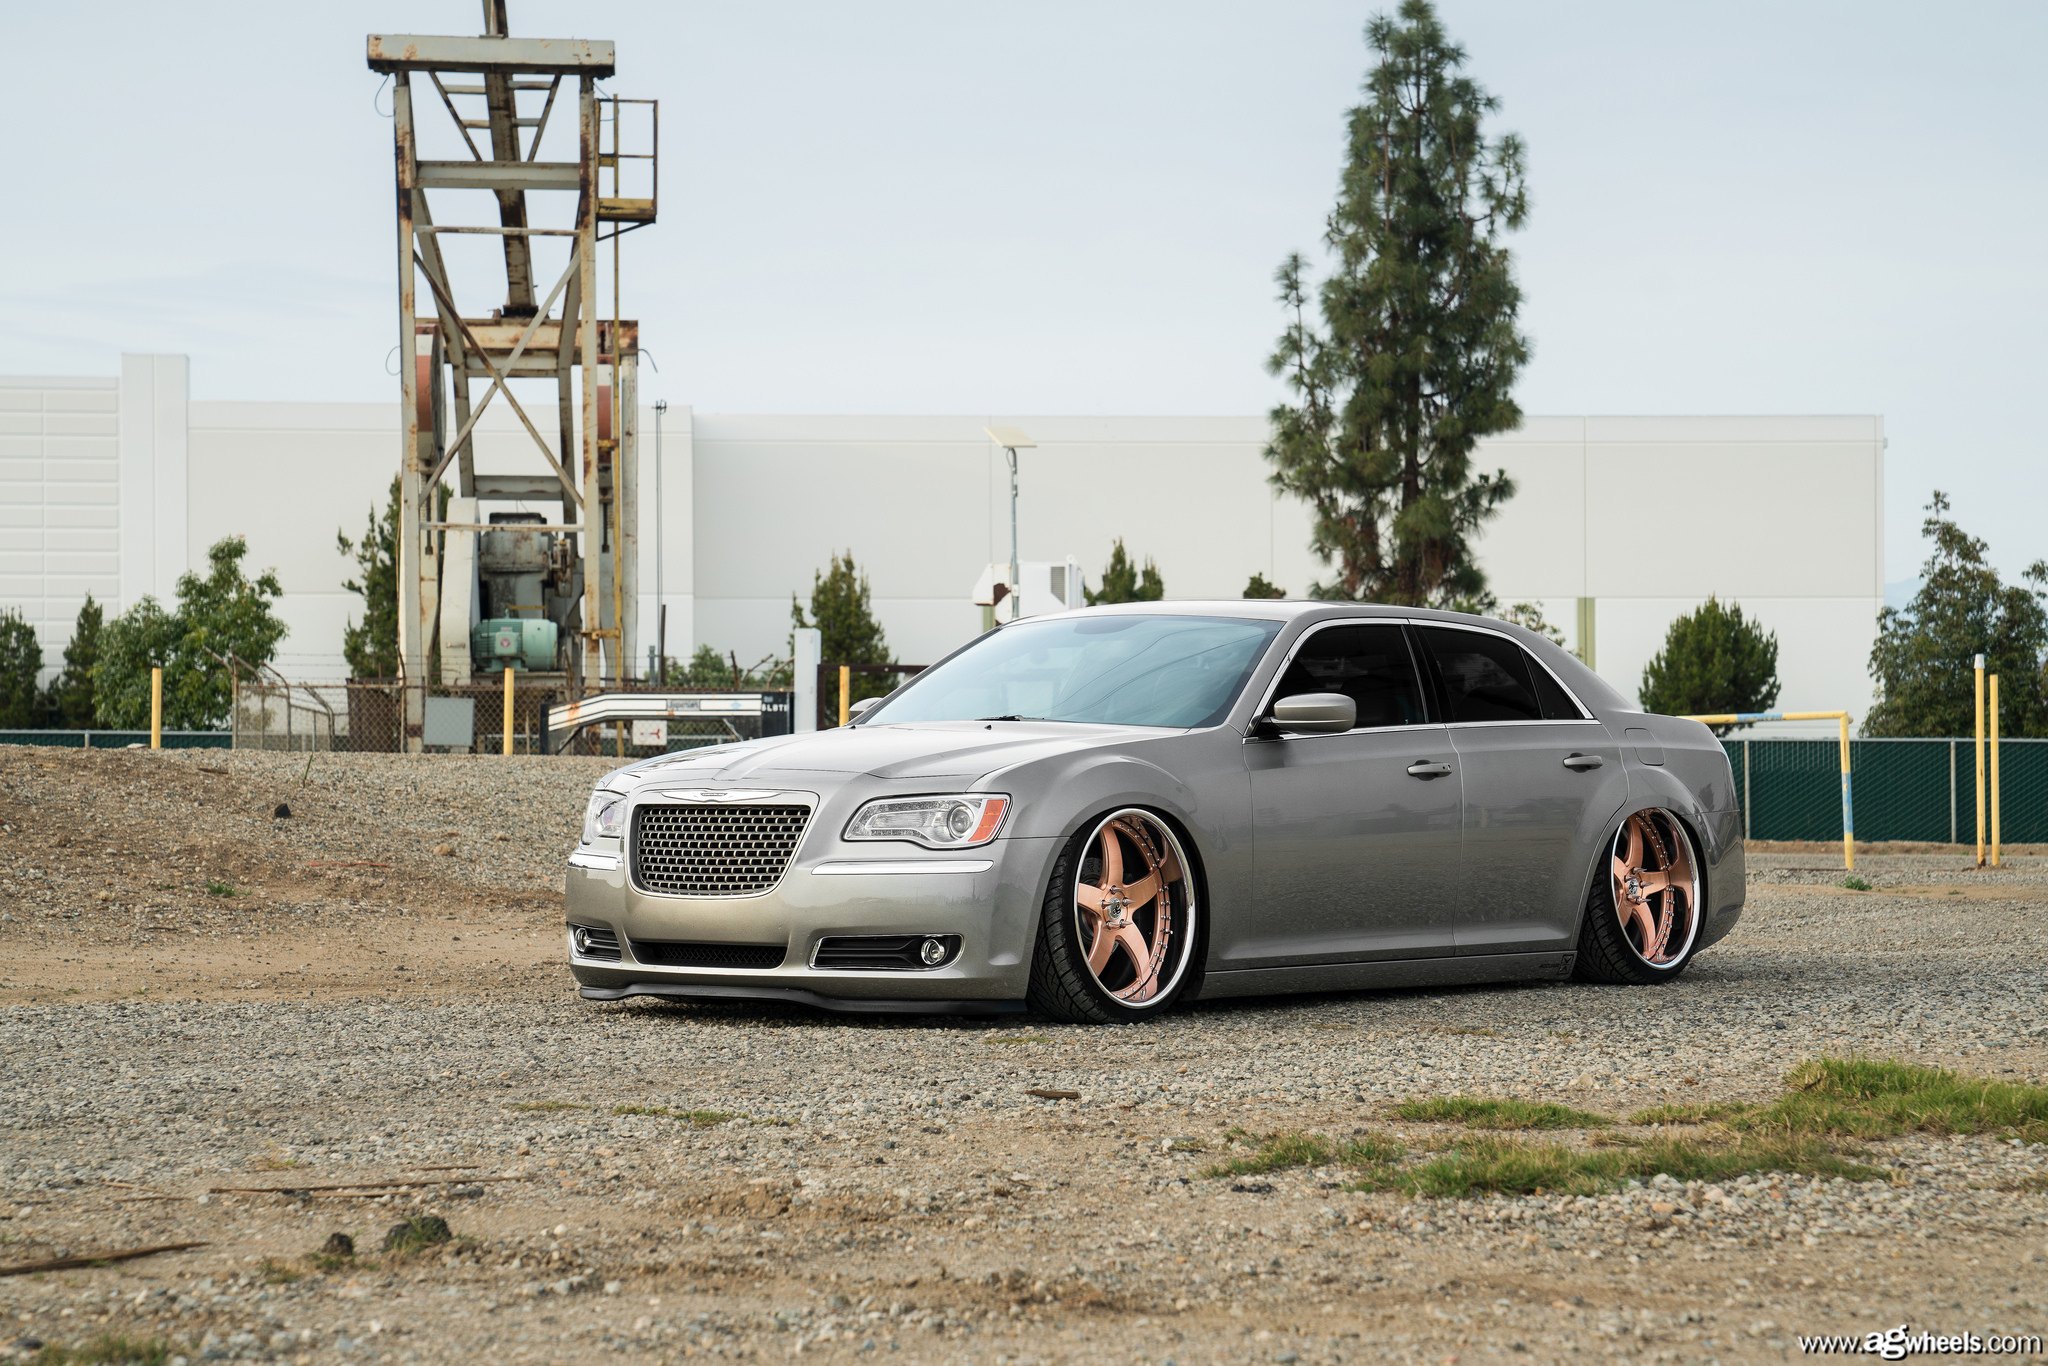 Gray Chrysler 300 with Chrome Mesh Grille - Photo by Avant Garde Wheels